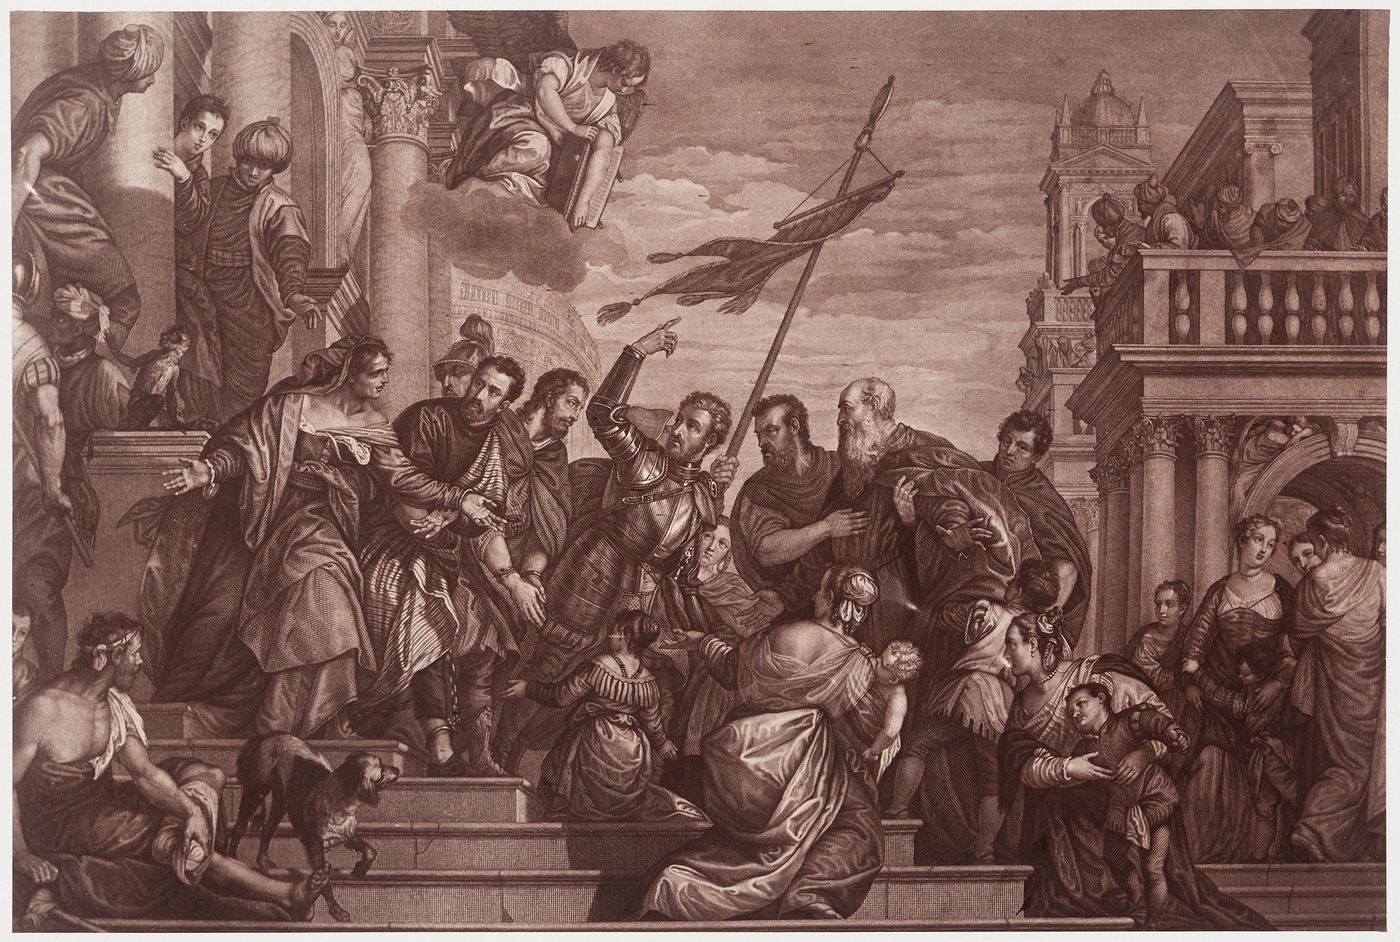 Photograph of the "Martyrdom of Saints Marcus and Marcellinus" by Veronese, San Sebastiano, Venice